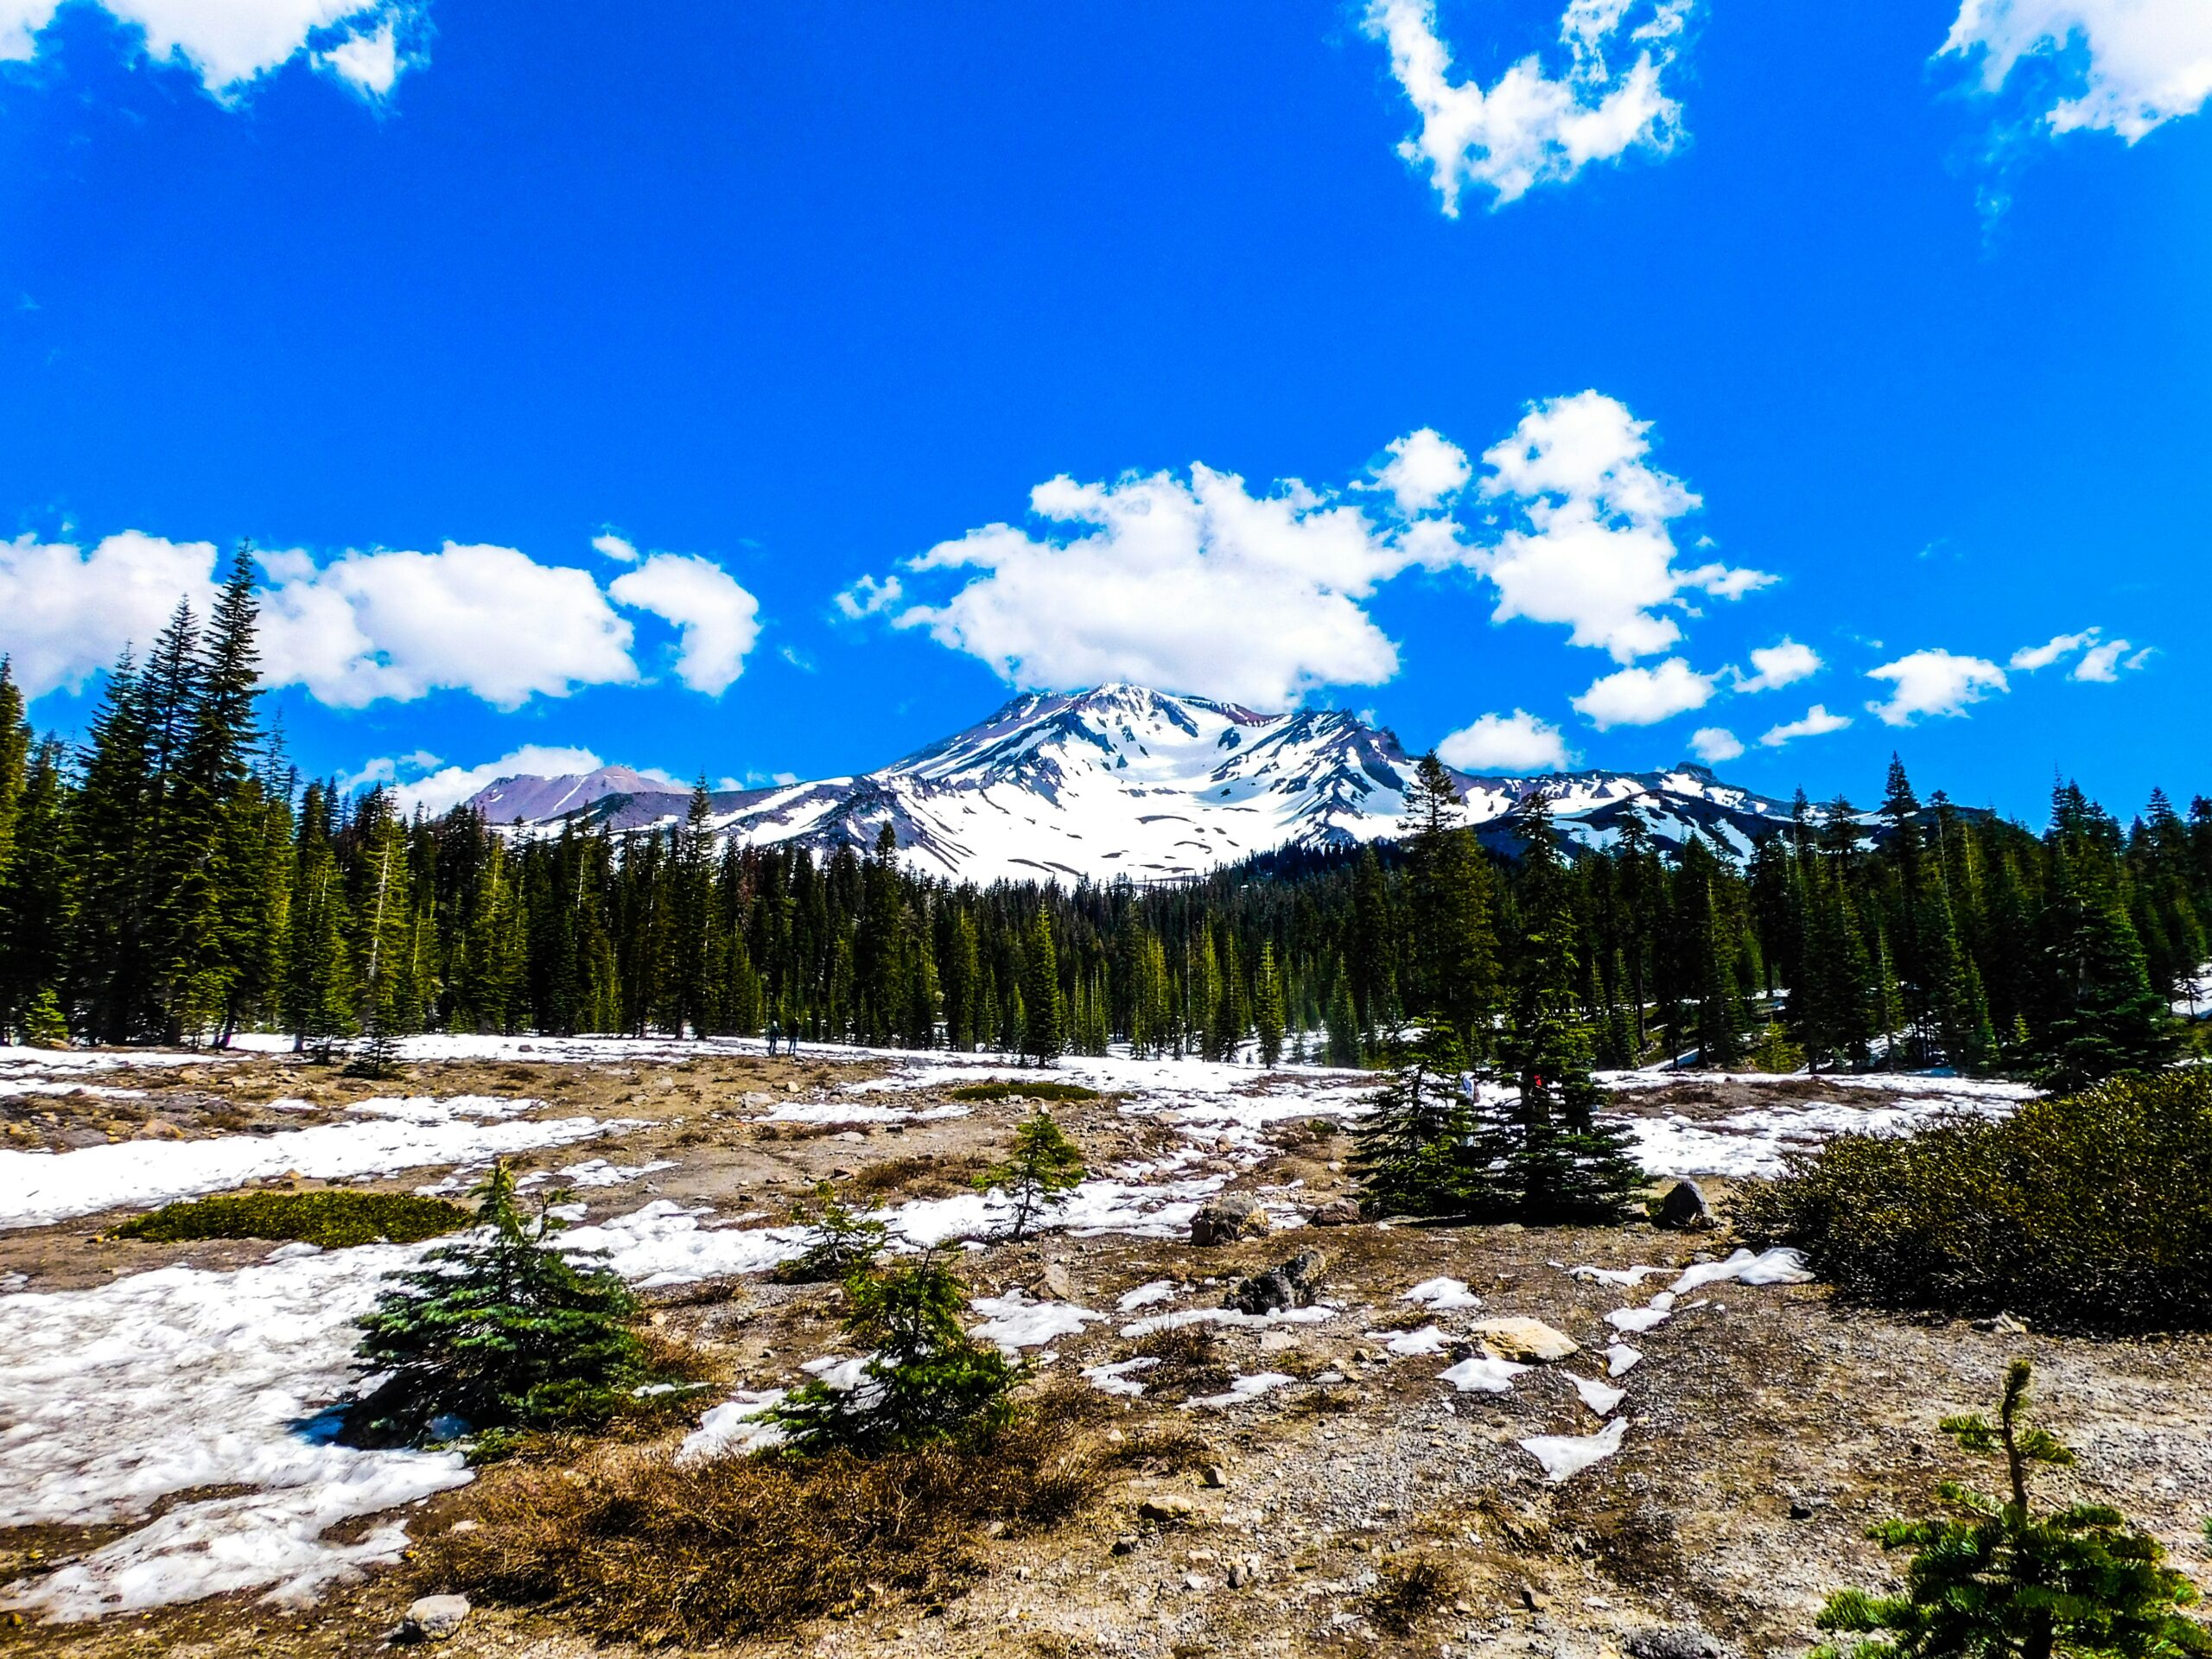 Has The Number Of Deaths On Mount Shasta Increased Over The Years?